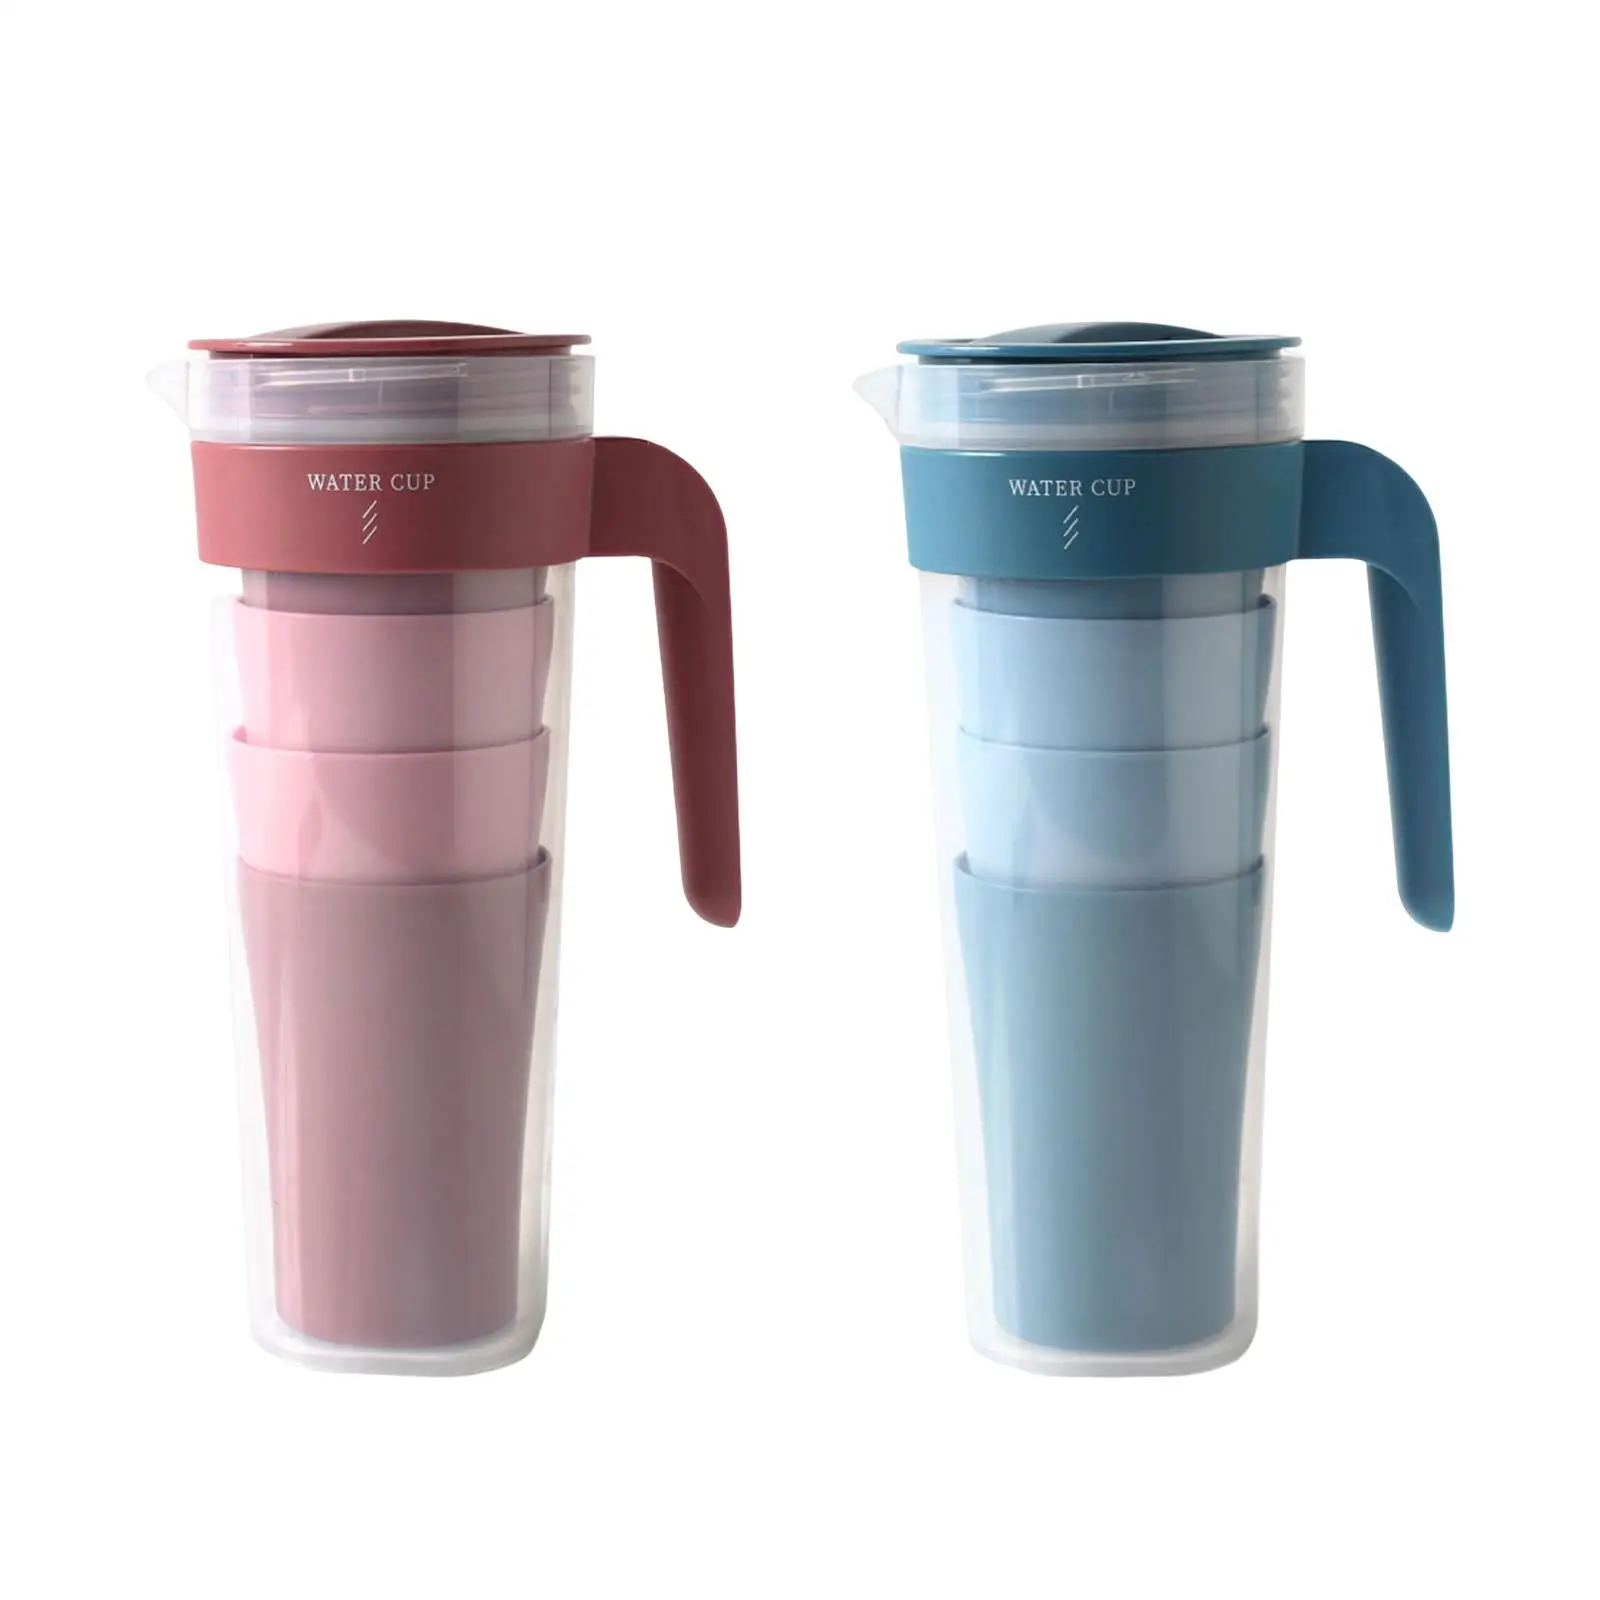 1000ml Water Pitcher Clear Hot & Cold Drink Pitcher with Lid Sealed Fridge Juice Jug Cold Water Bottle for Lemonade Milk Coffee